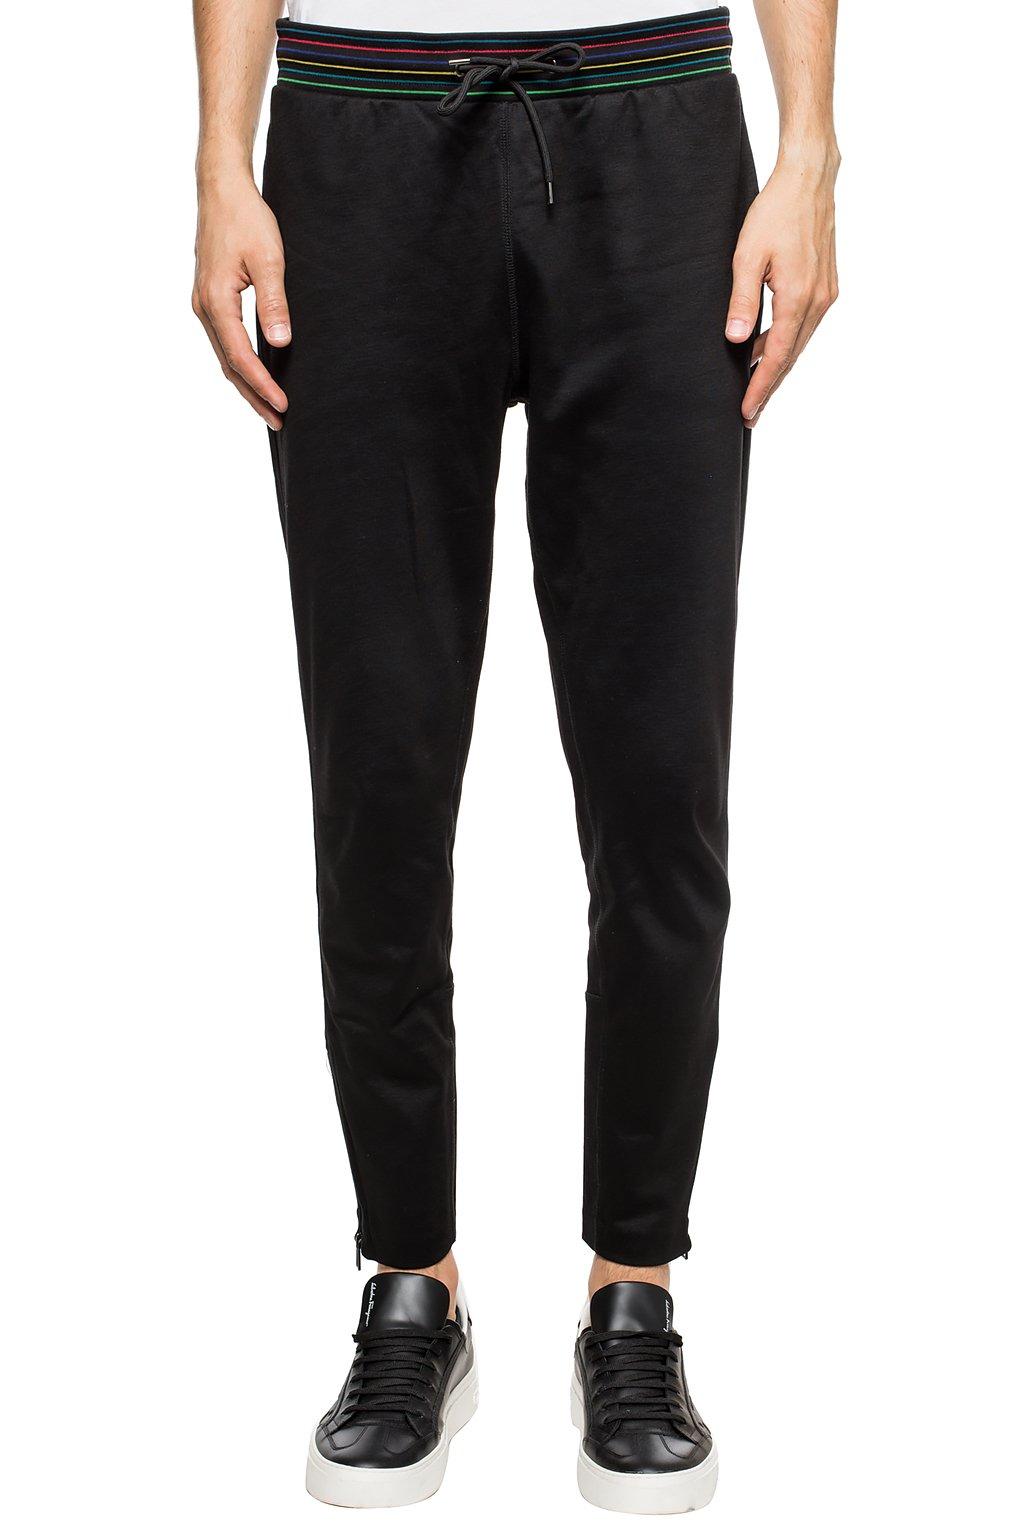 PS by Paul Smith Cotton Tapered Leg Sweatpants in Black for Men - Lyst